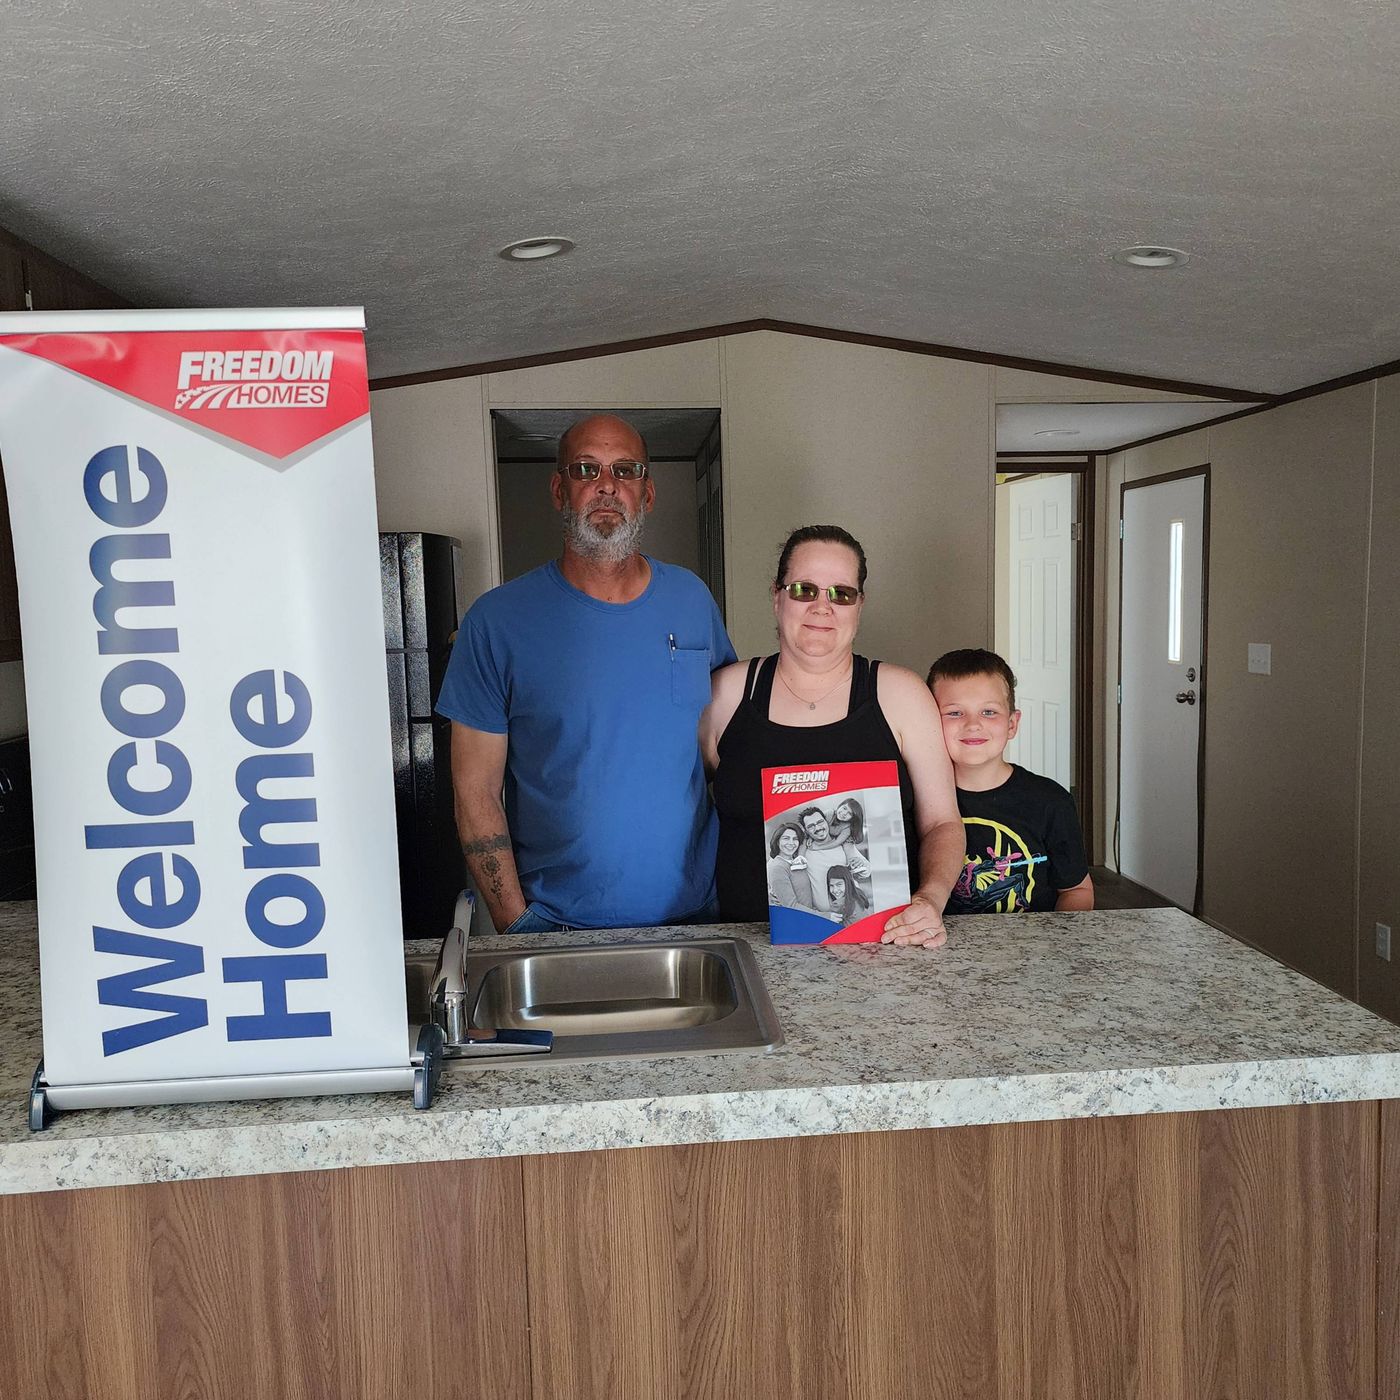 MICHAEL C. welcome home image